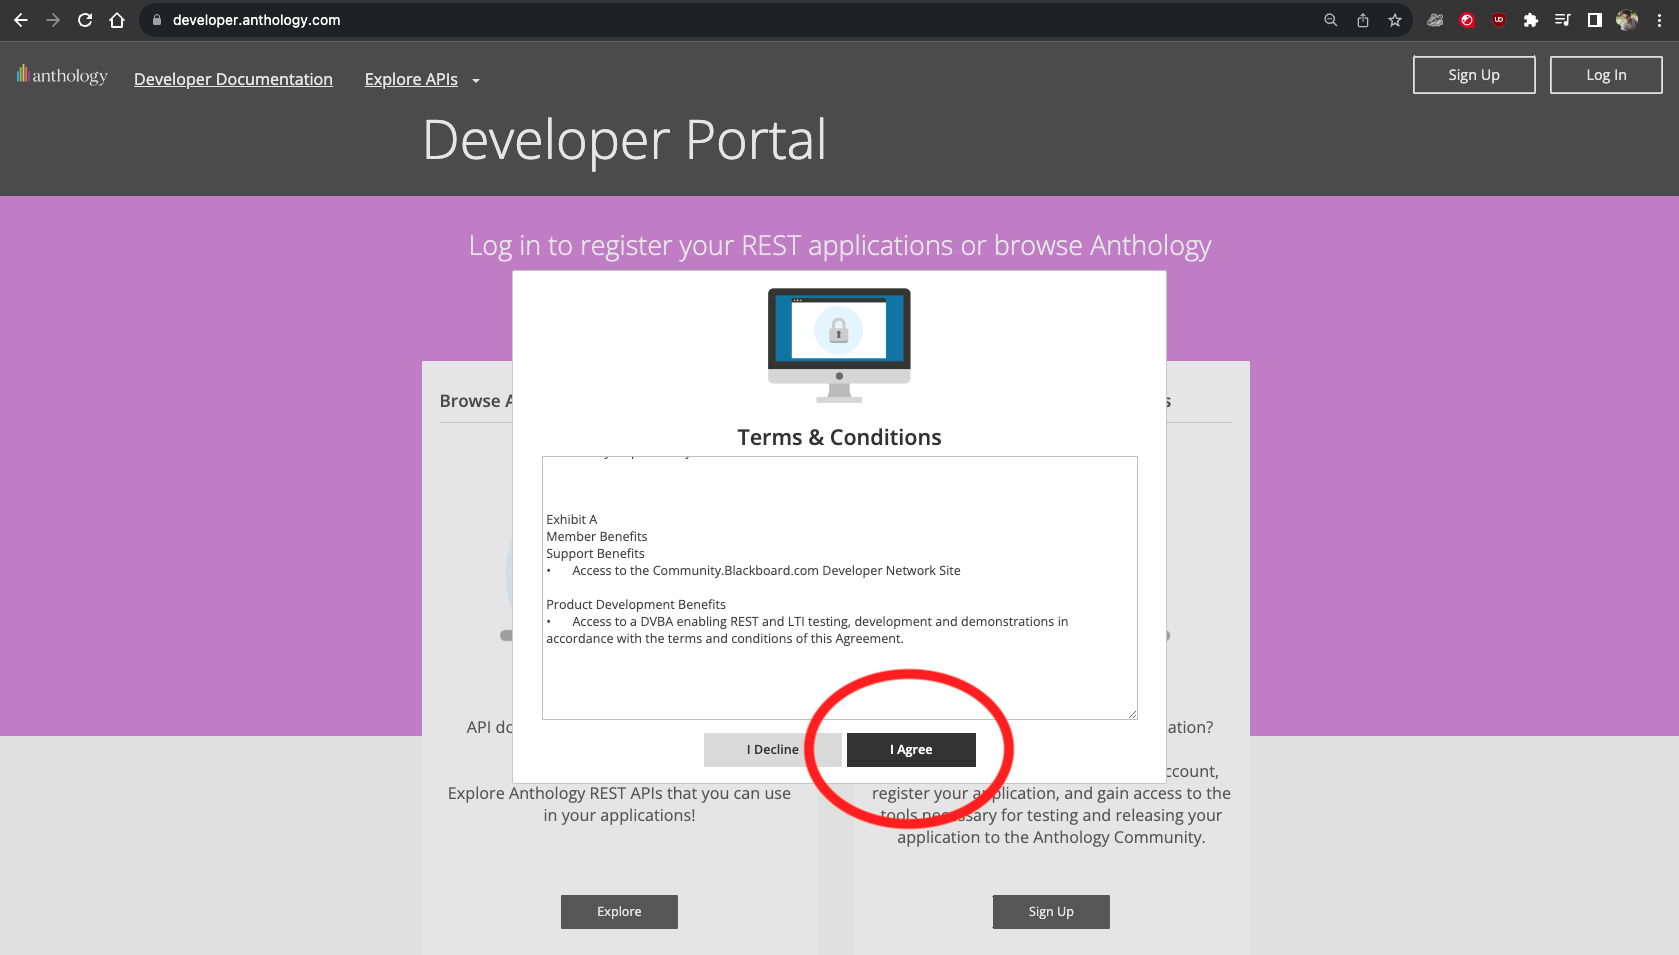 Developer portal terms and condition window